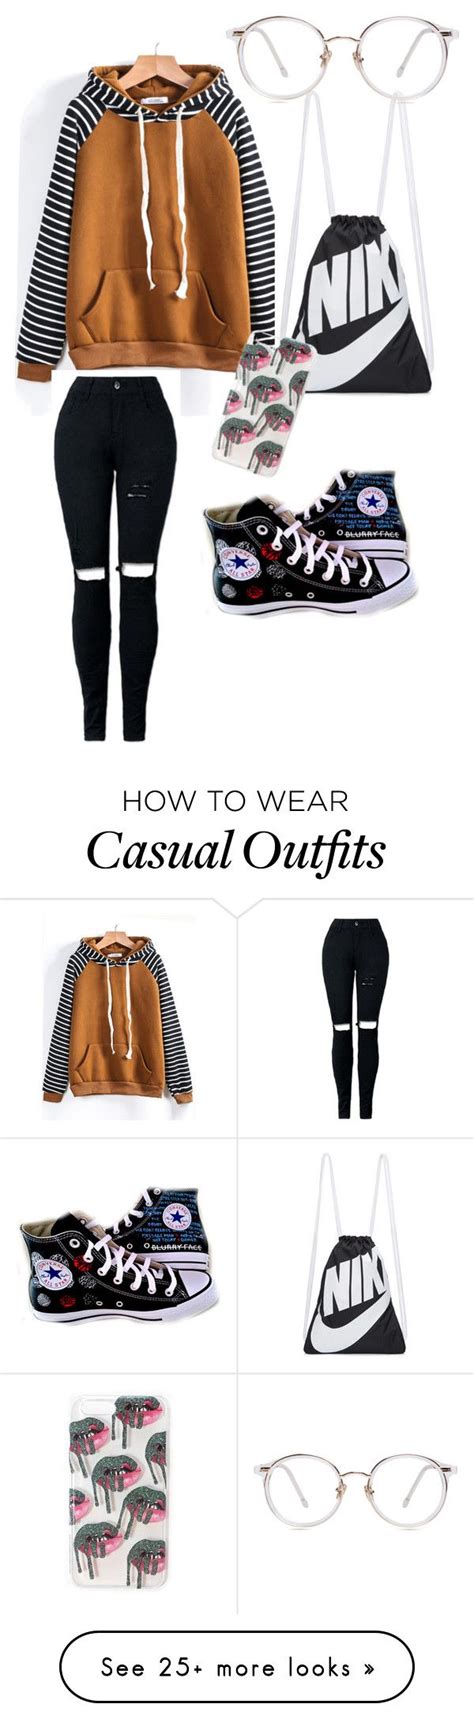 Read more blacktomboy dance : "Casual" by emutrash4 on Polyvore featuring NIKE and Converse | Tomboy outfits, Dance outfits ...